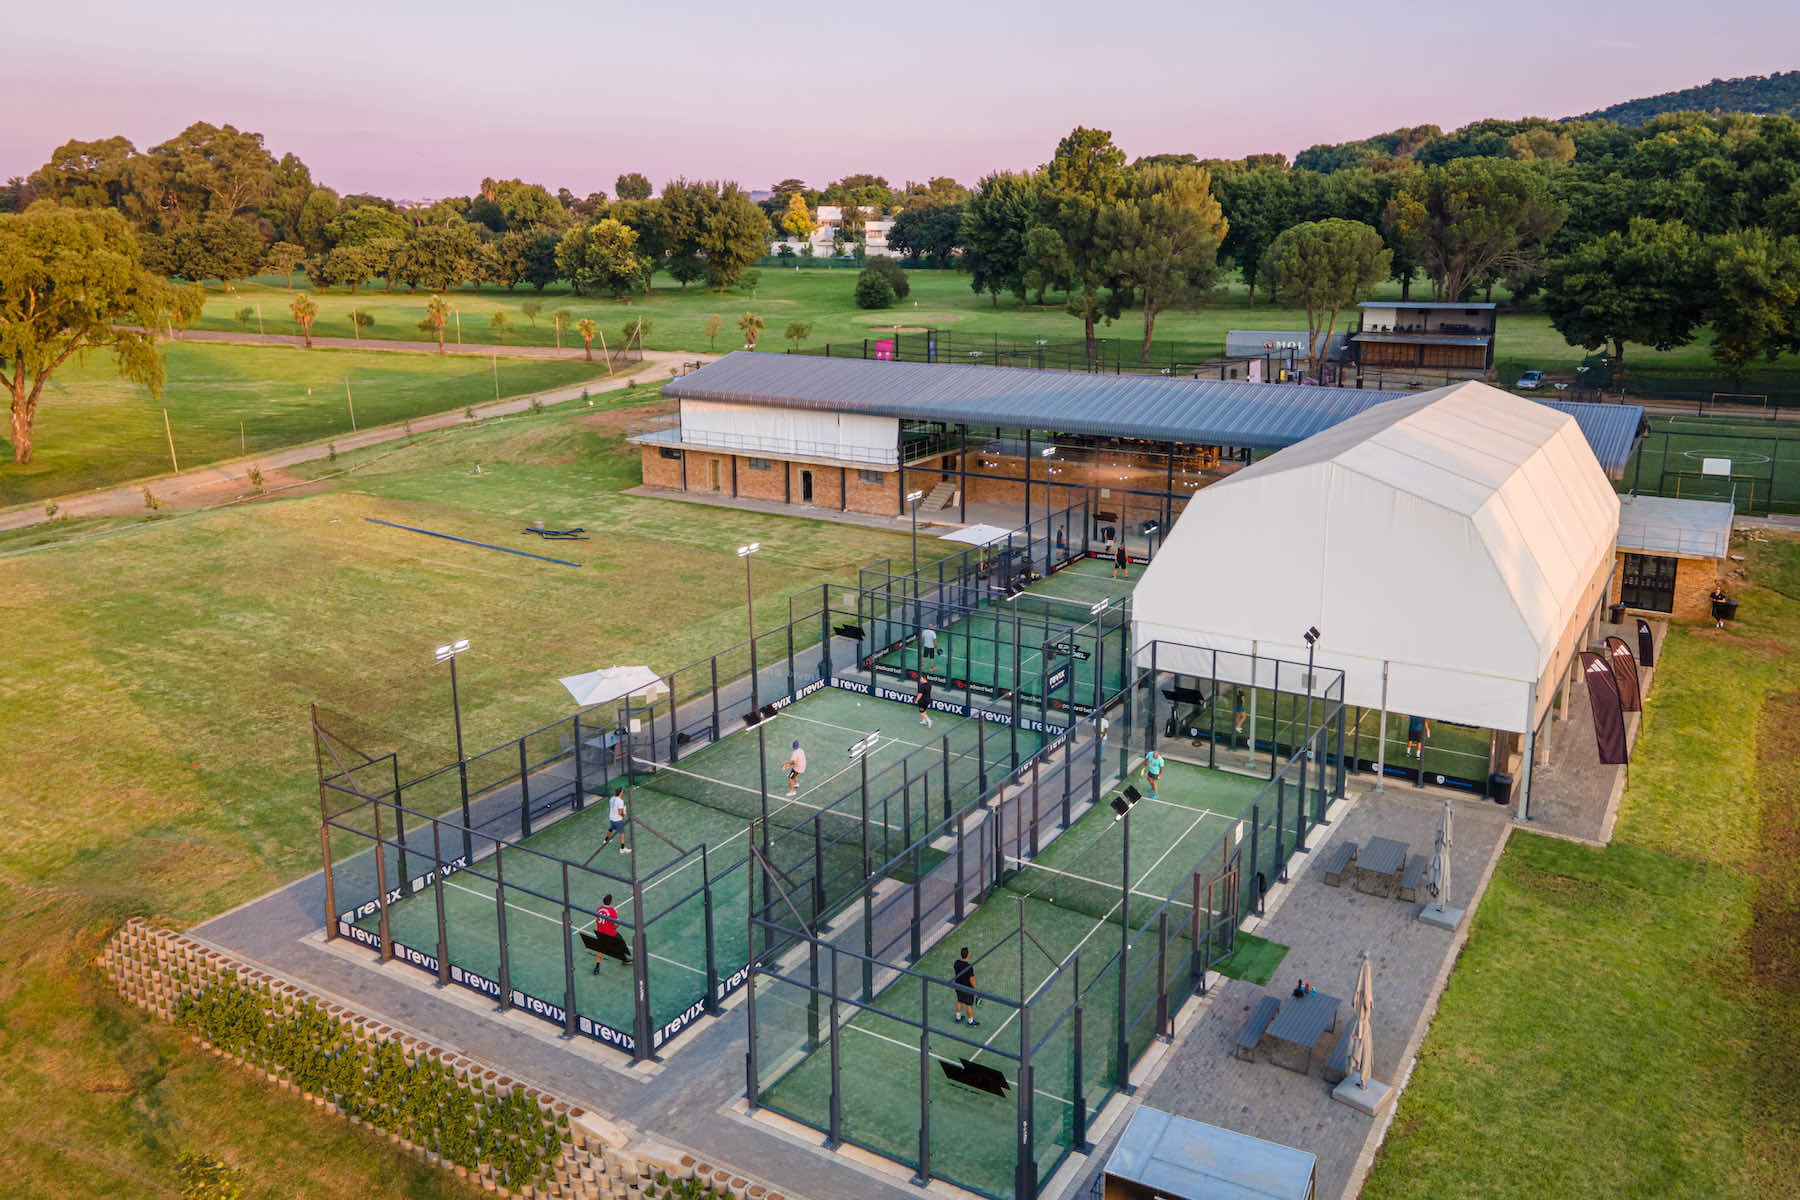 Overview of a padel club with multiple courts